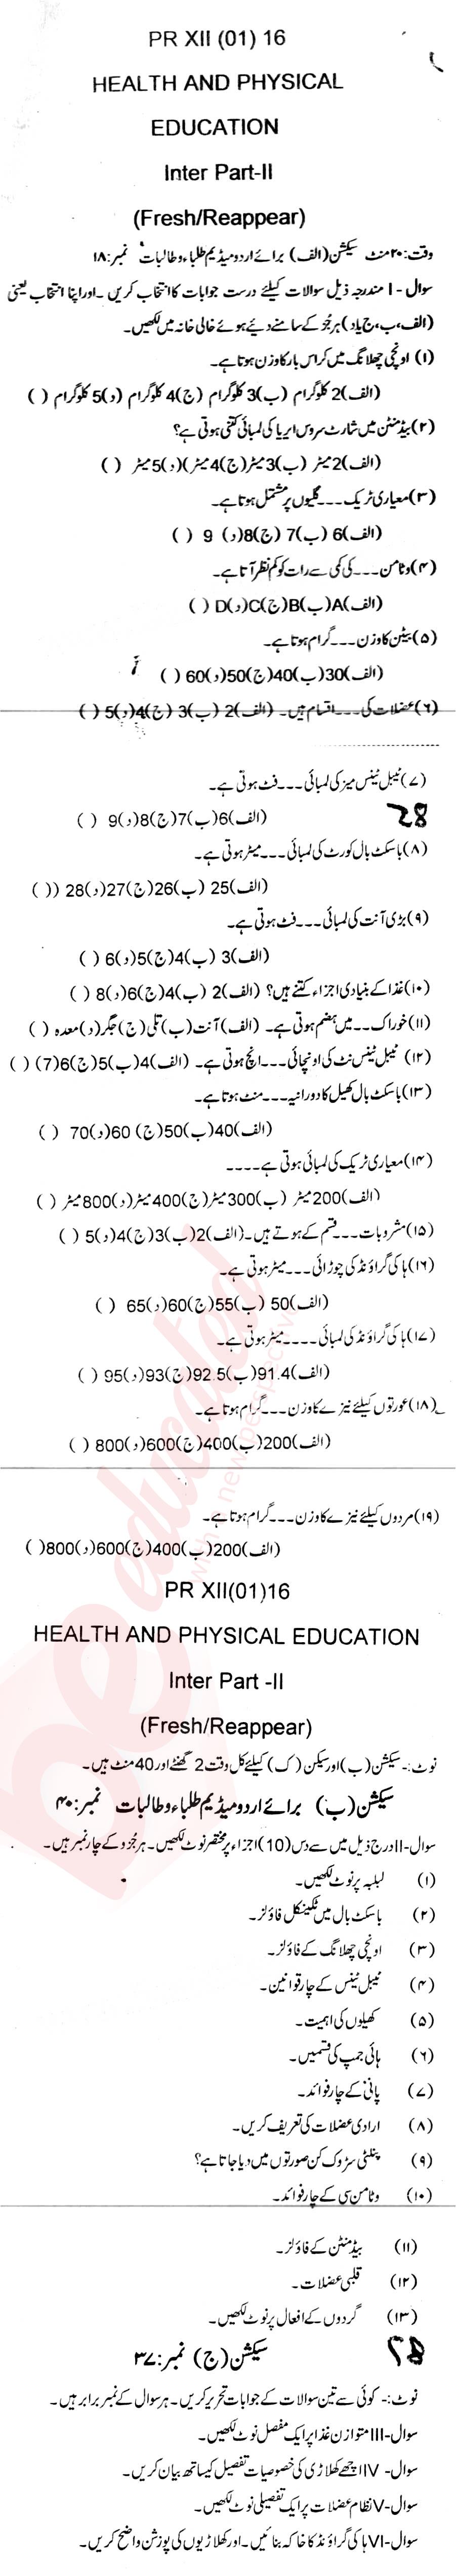 Health and Physical Education FA Part 2 Past Paper Group 1 BISE Bannu 2016